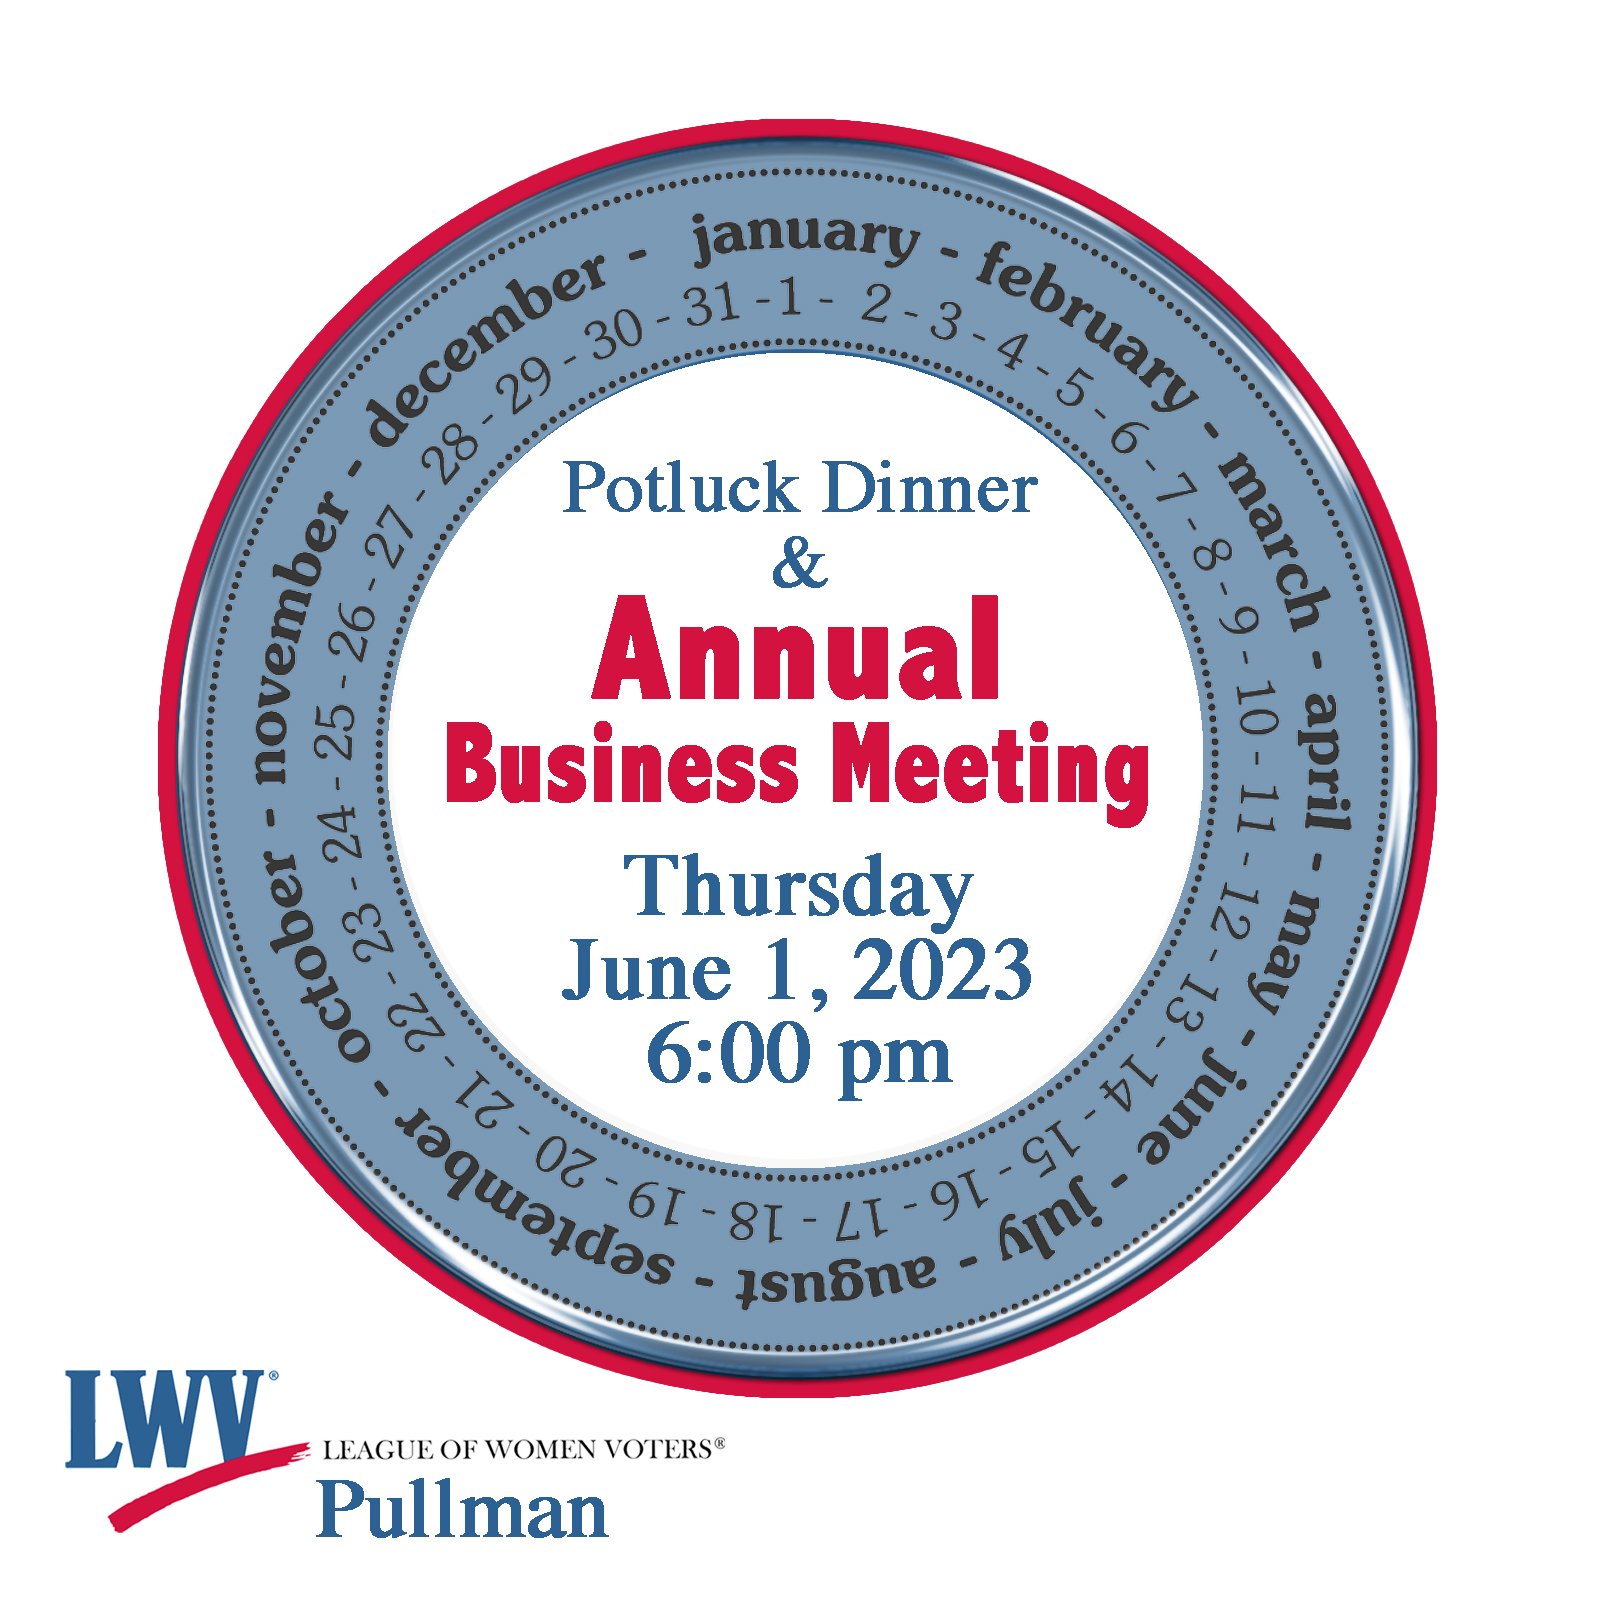 picture of a circular calendar with an invite to the LWV pot luck and annual business meeting Thursday, June 1 20203 at 6 pm.